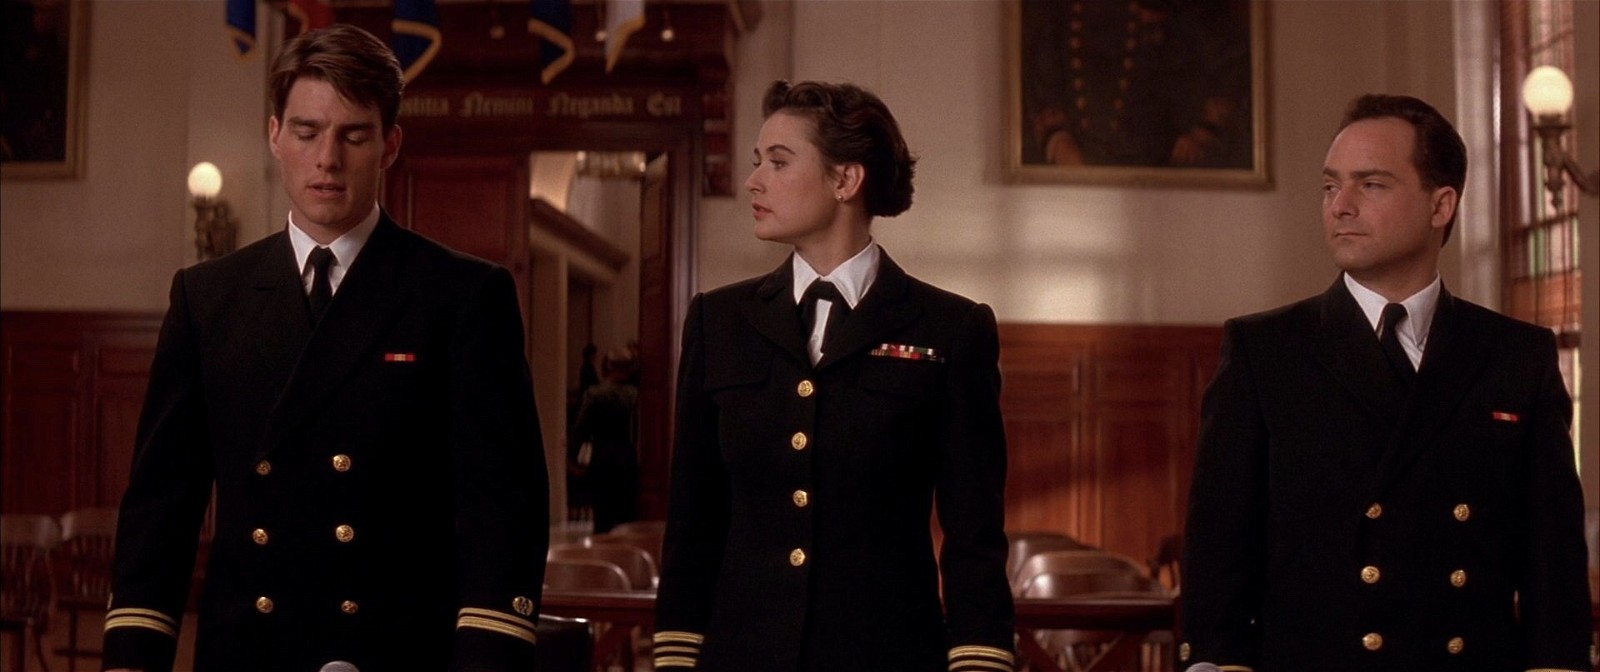 Tom Cruise, Demi Moore, and Kevin Pollak in A Few Good Men